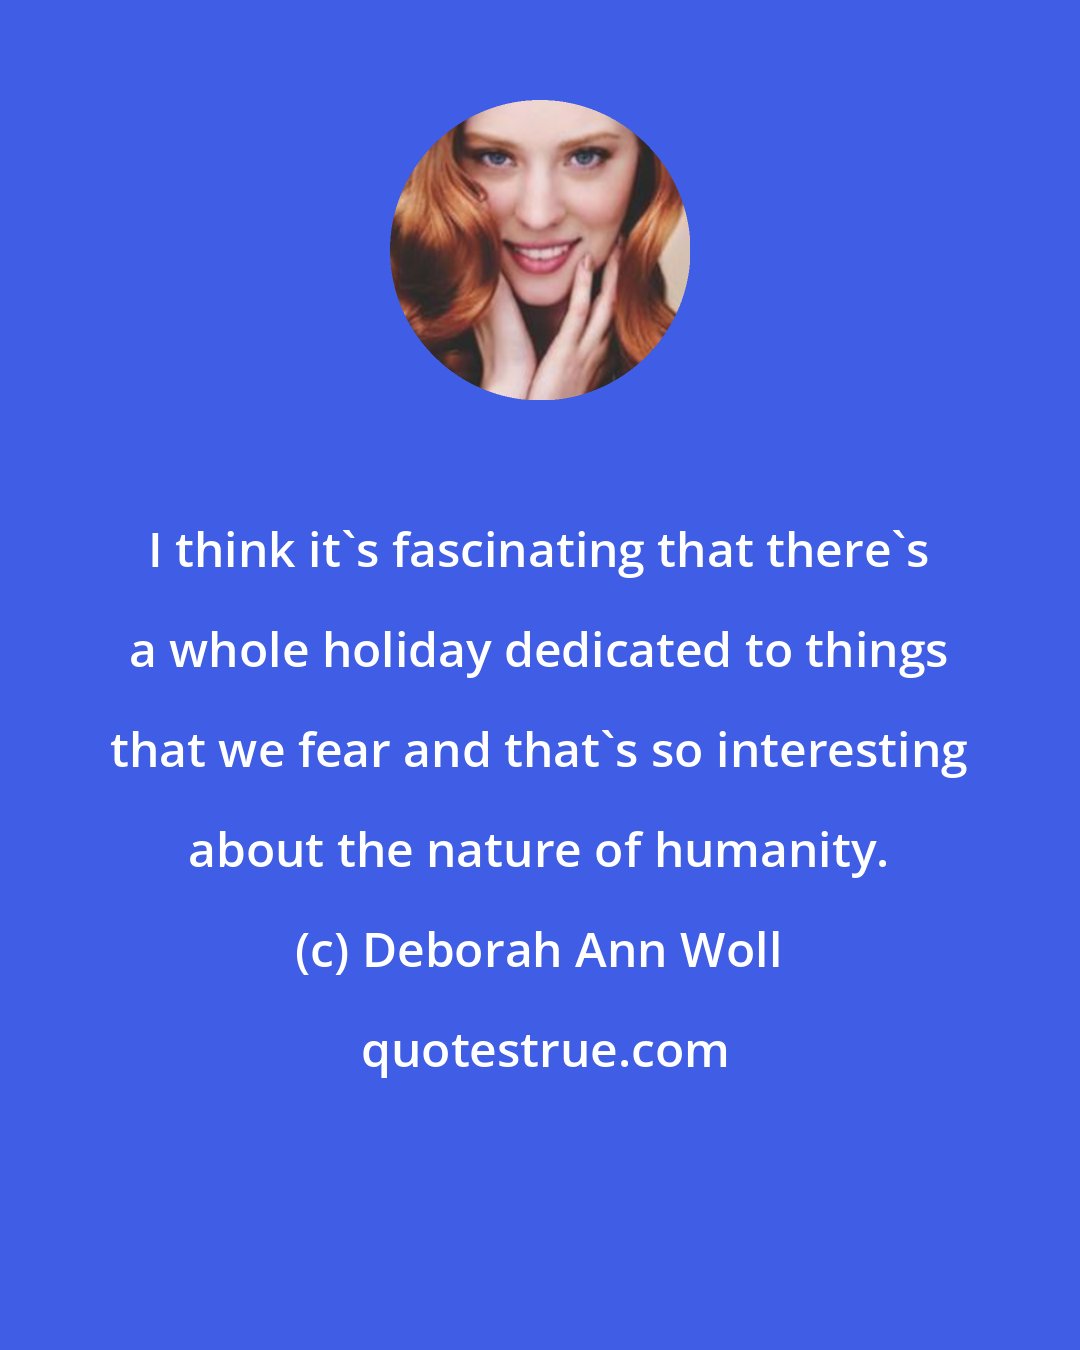 Deborah Ann Woll: I think it's fascinating that there's a whole holiday dedicated to things that we fear and that's so interesting about the nature of humanity.